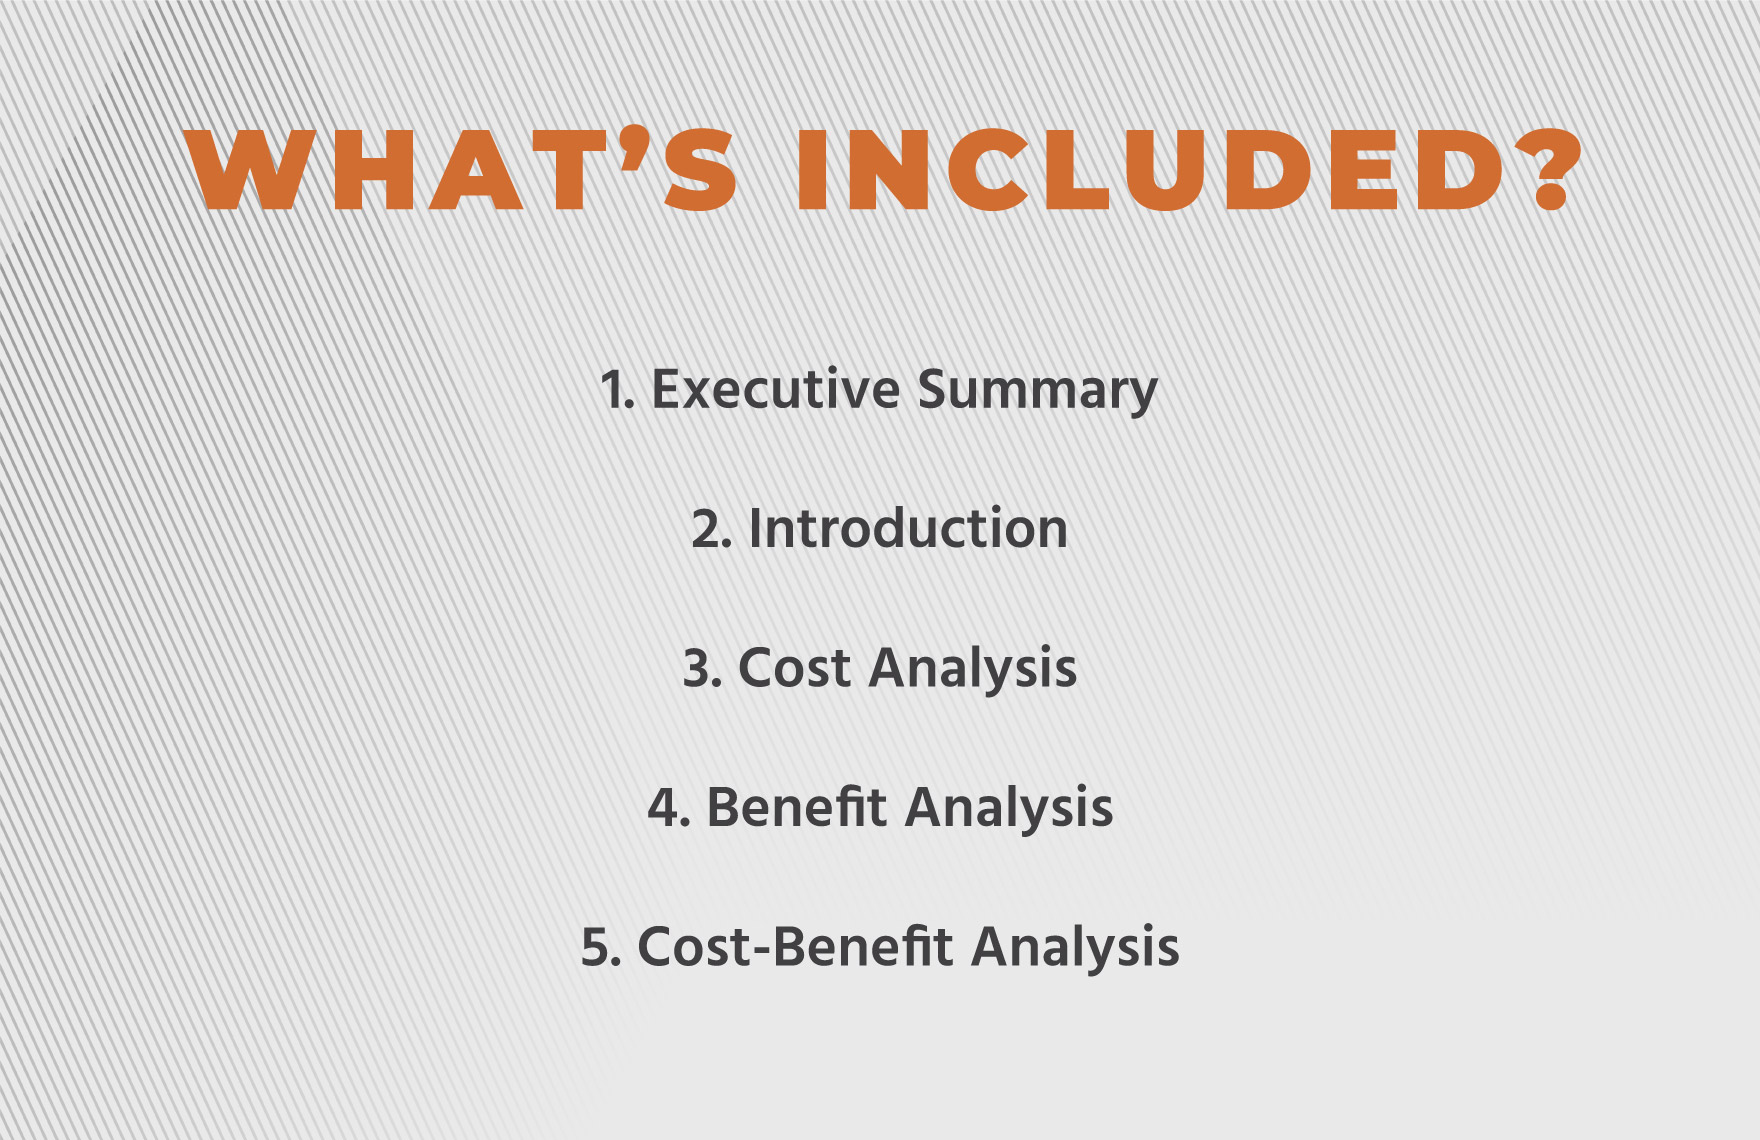 Training Cost-Benefit Analysis Report HR Template